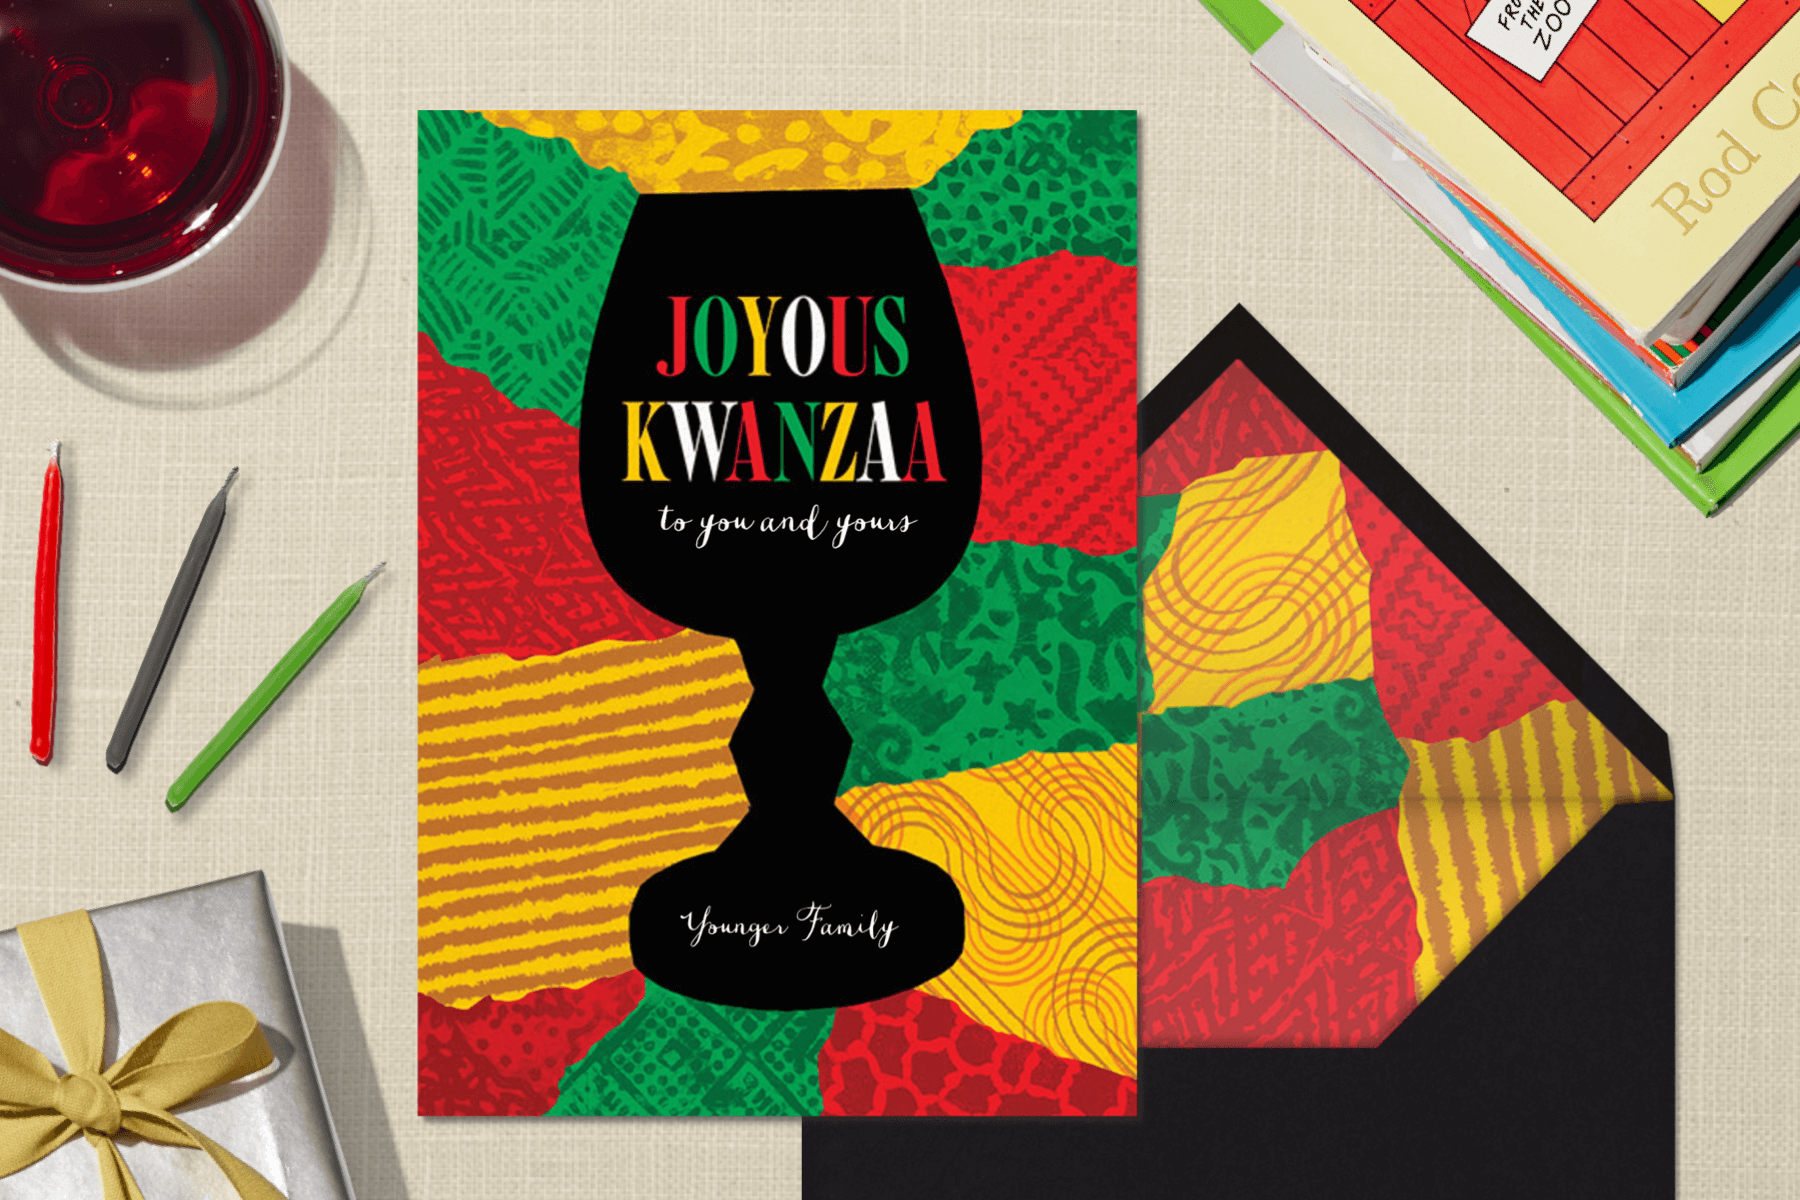 A Kwanzaa invitation surrounded by wine, candles, and books.